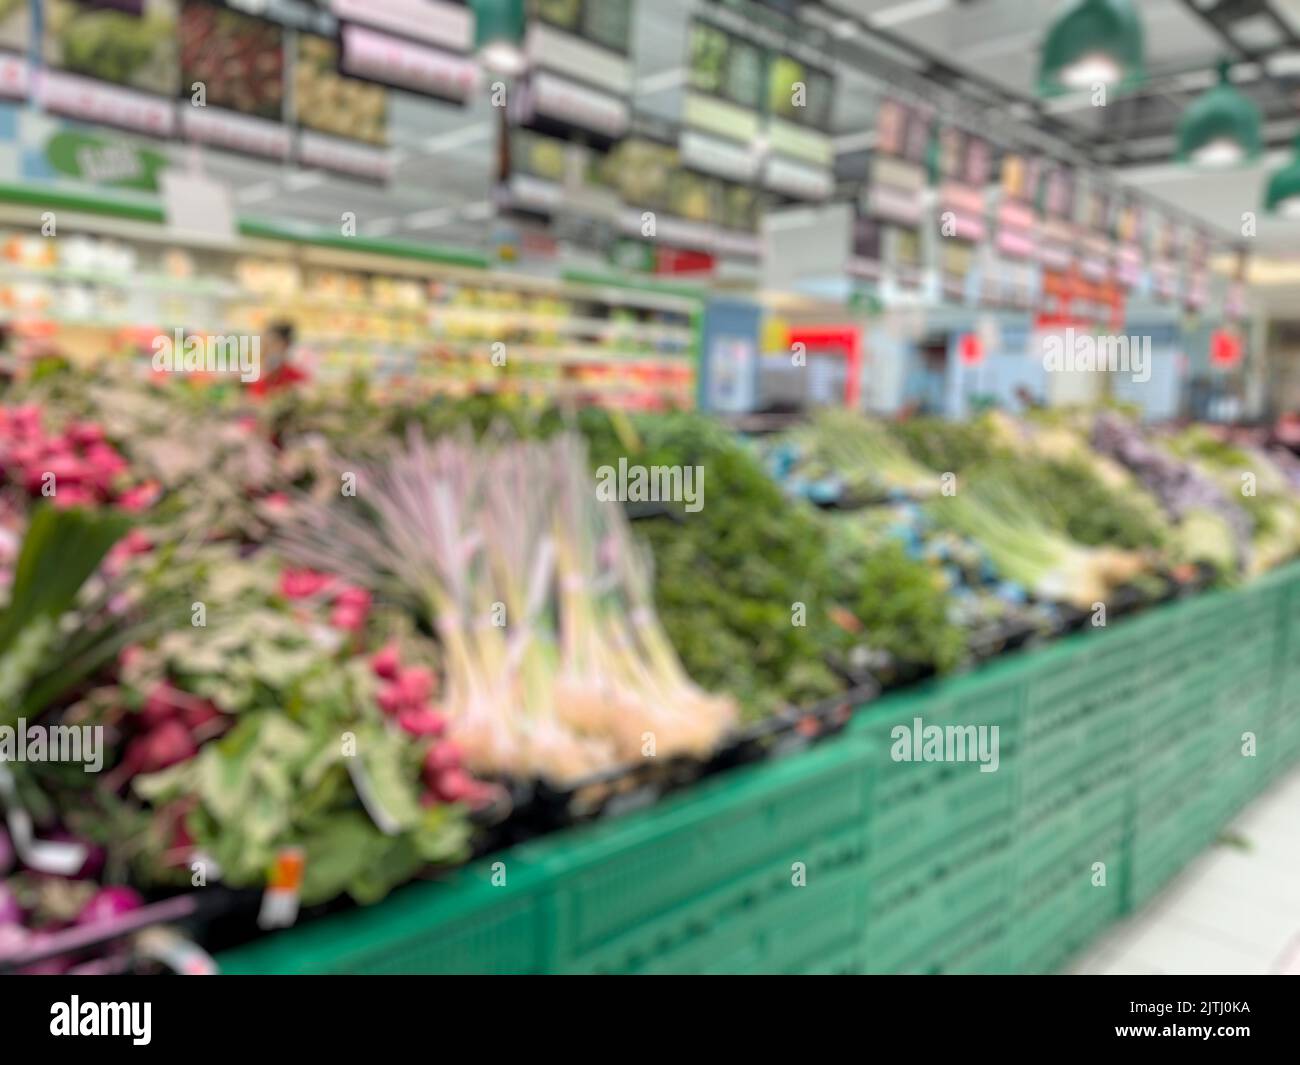 Abstract blurred supermarket vegetables aisles for background. - stock photo Stock Photo